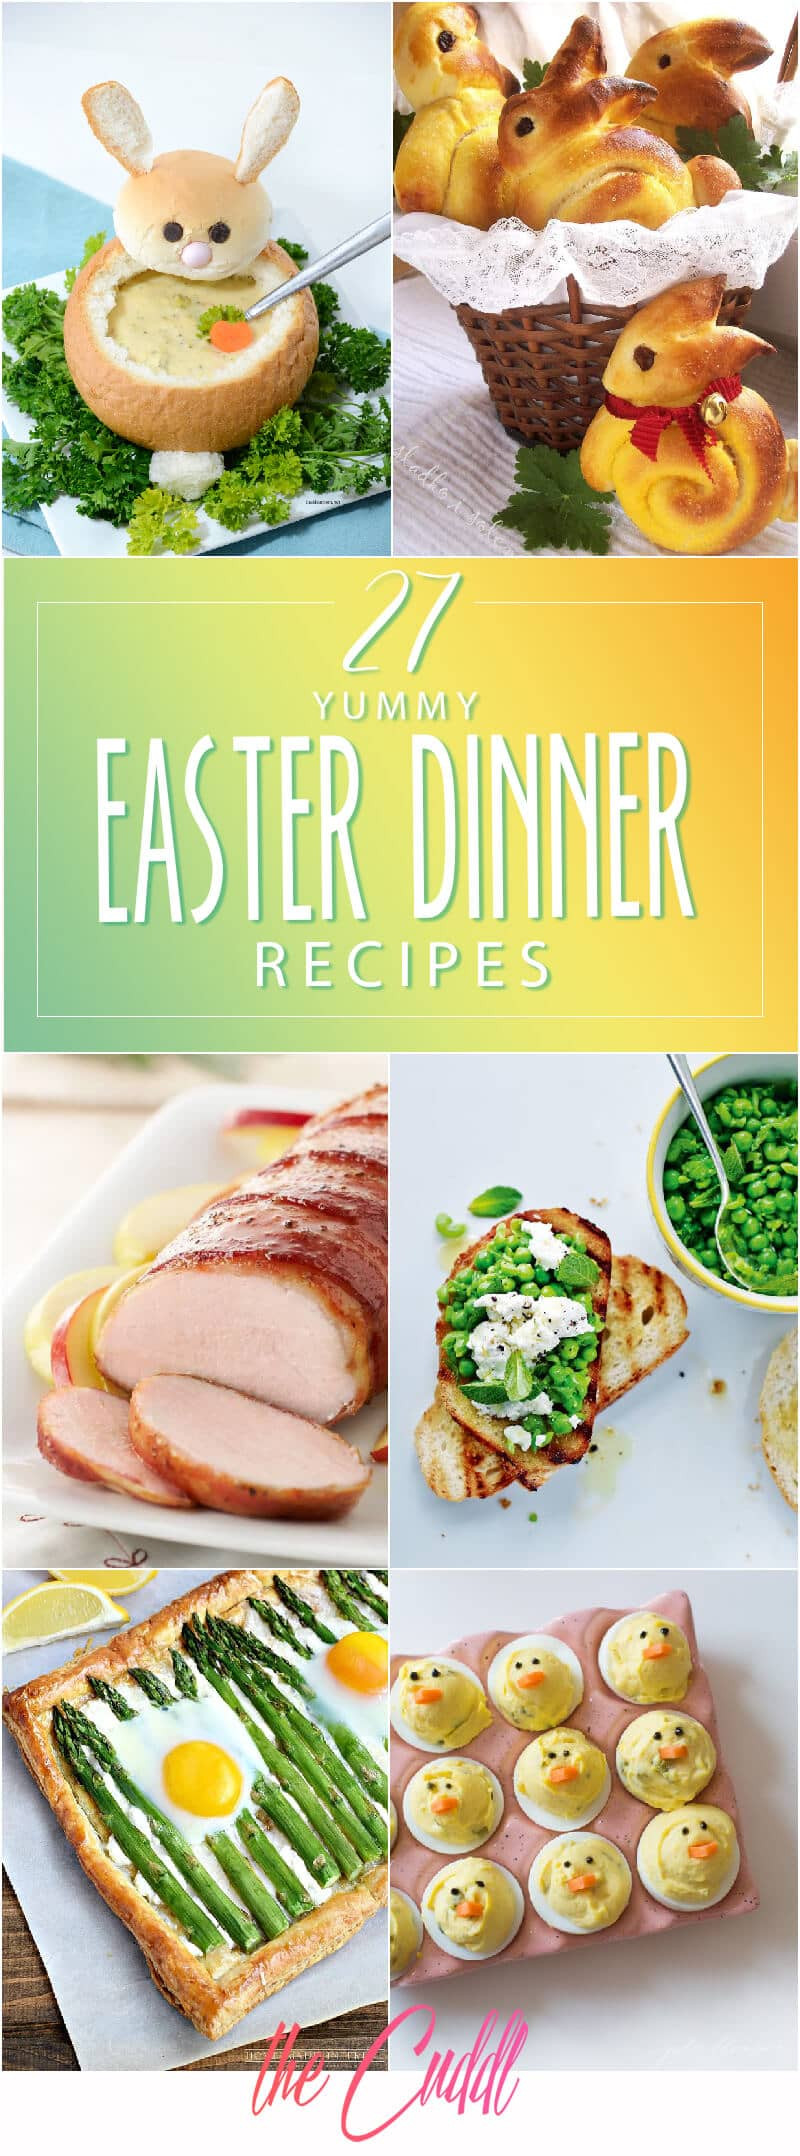 Prepared Easter Dinner
 27 Yummy Easter Dinner Ideas to Wow Your Guests